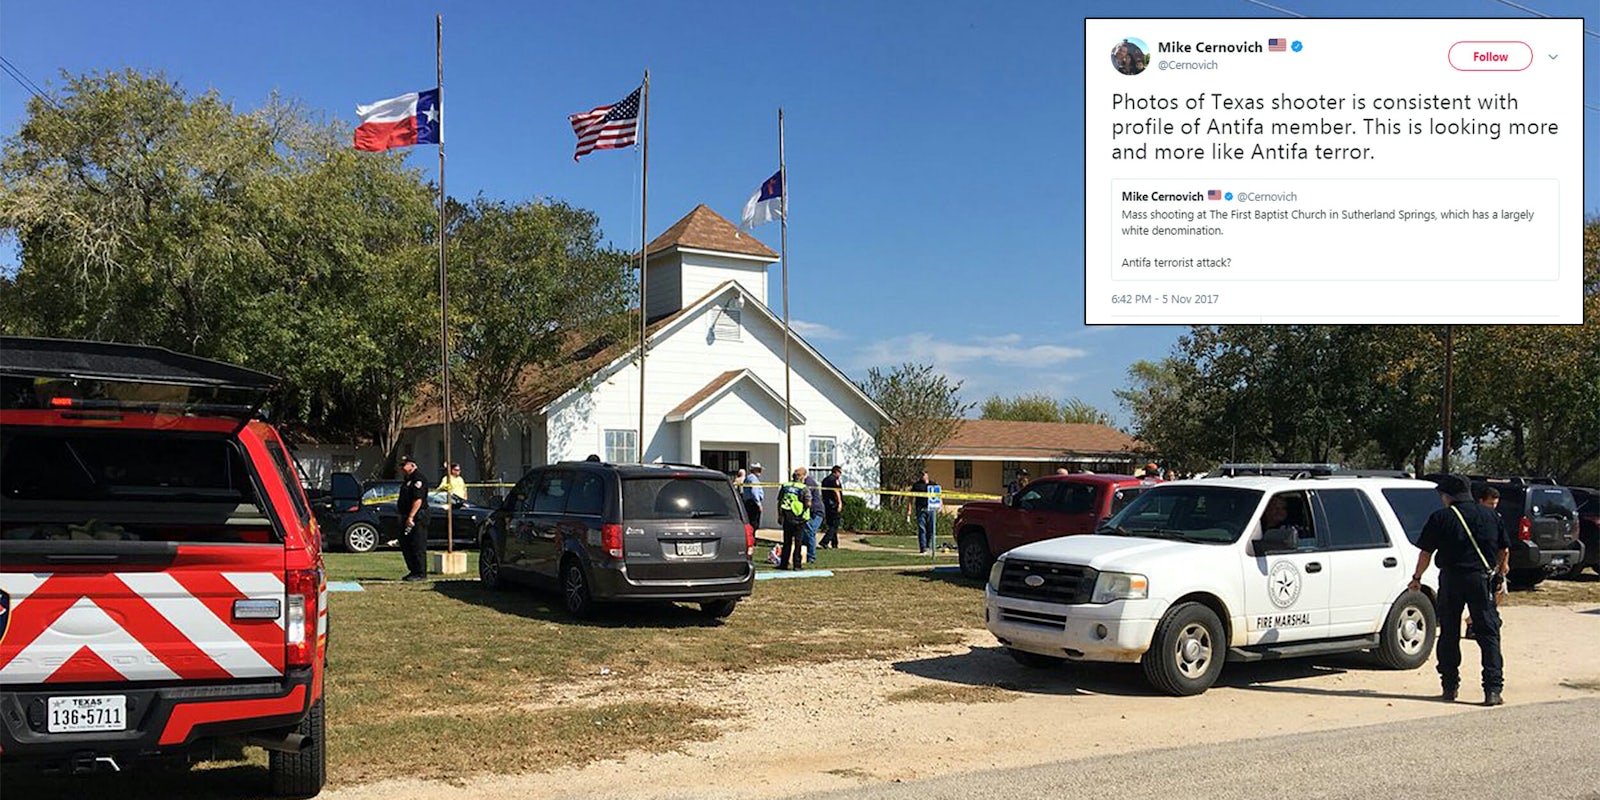 While there are still a number of unanswered questions about the shooting in Sutherland Springs, Tx. on Sunday that left 26 people dead–including eight members of one family–that hasn’t stopped far-right personalities from speculating about the motivations of Devin P. Kelley, 26, who authorities say carried out the attack.